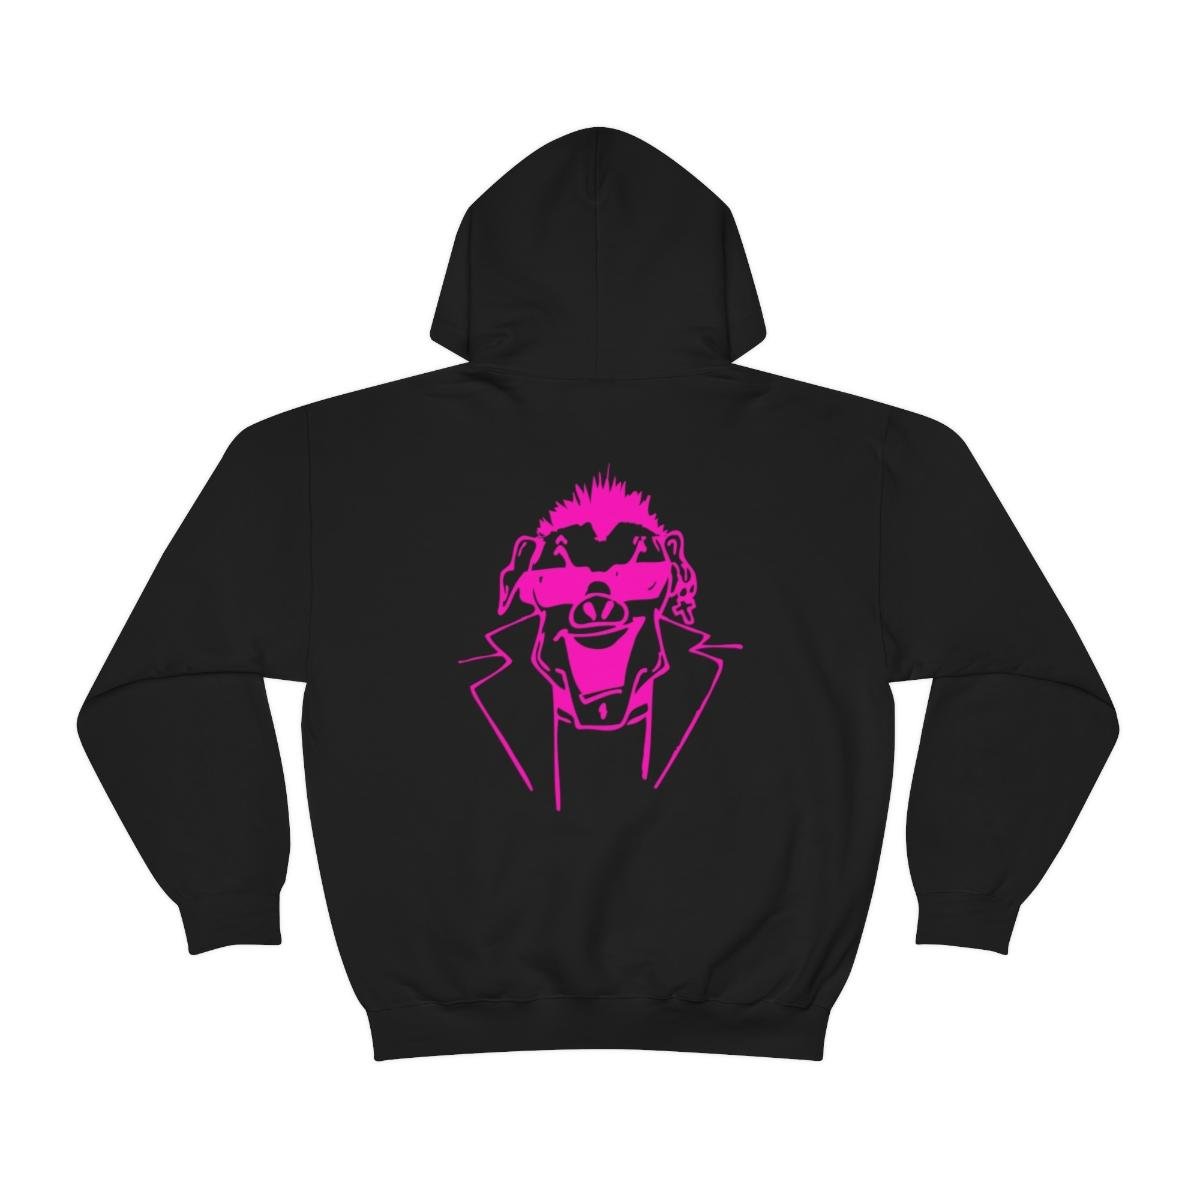 One Bad Pig – The Pig Pullover Hooded Sweatshirt